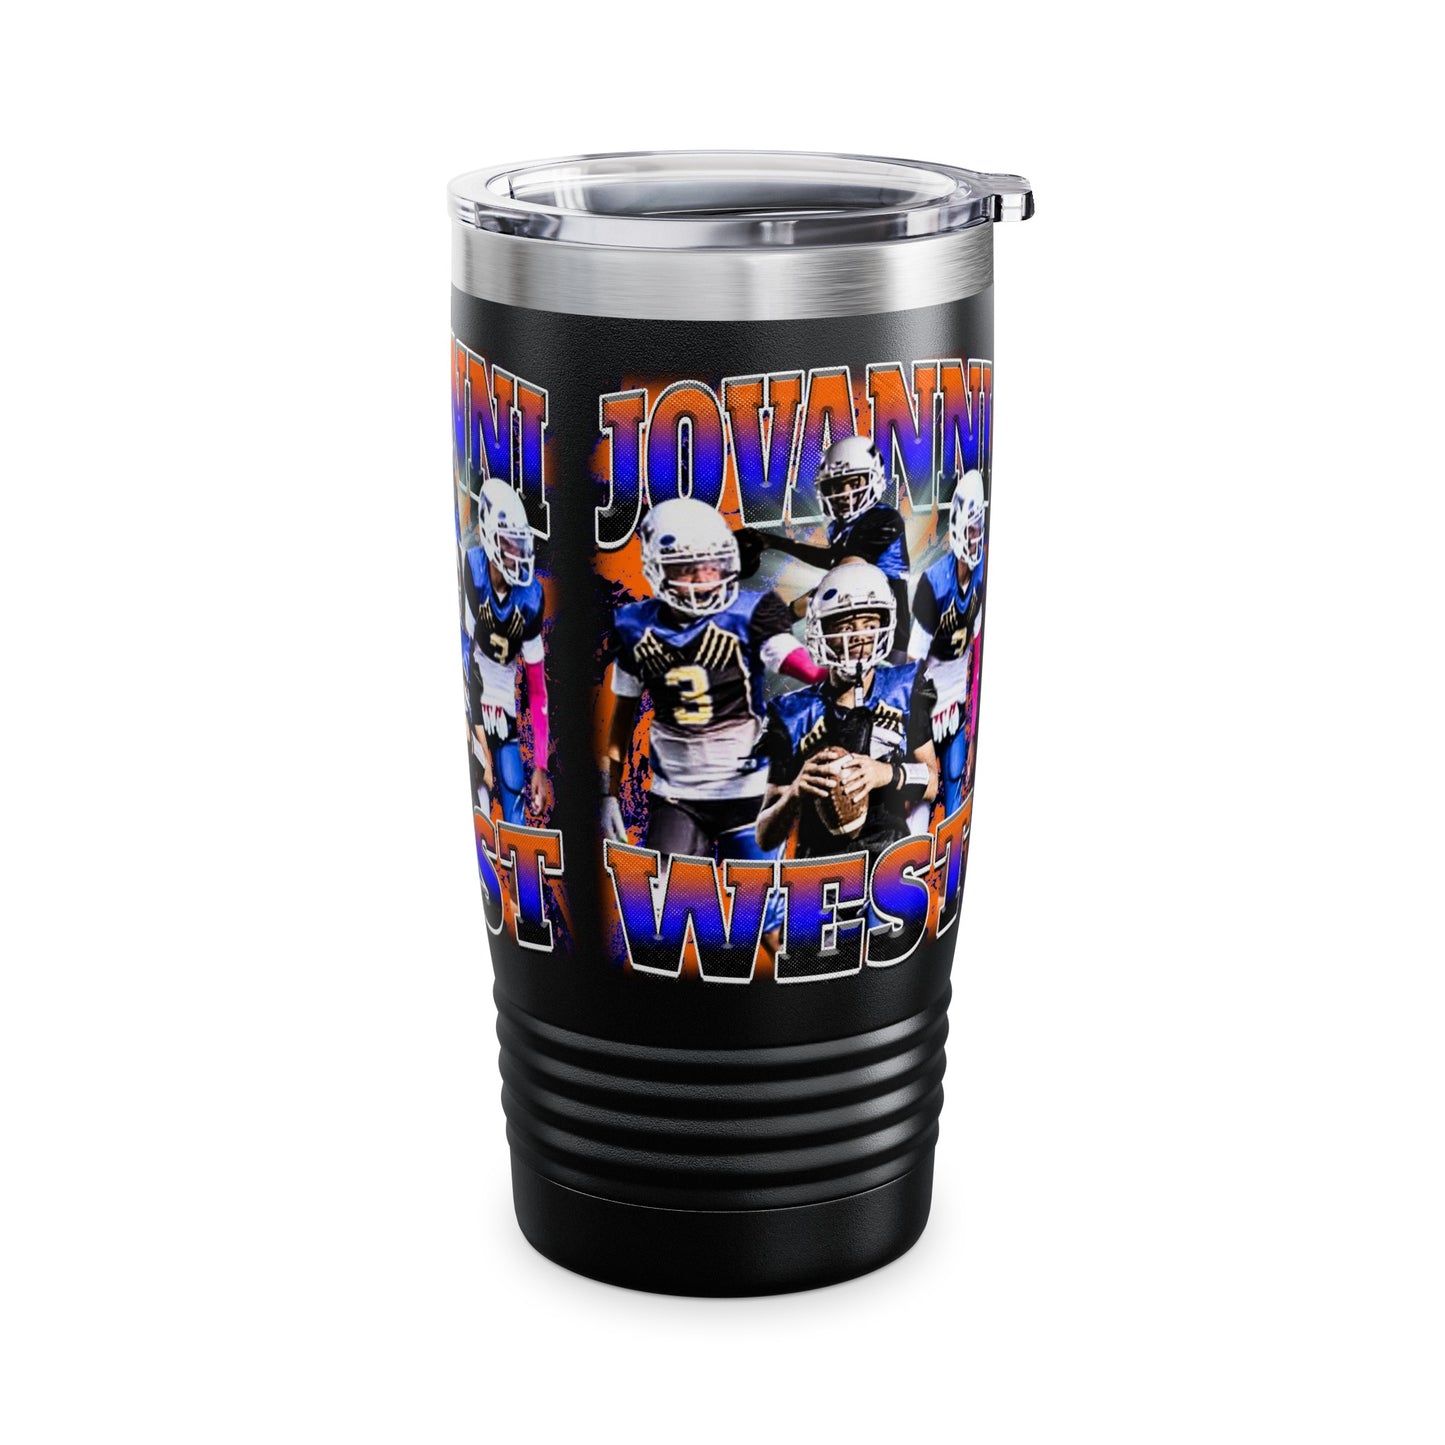 Jovanni West Stainless Steal Tumbler